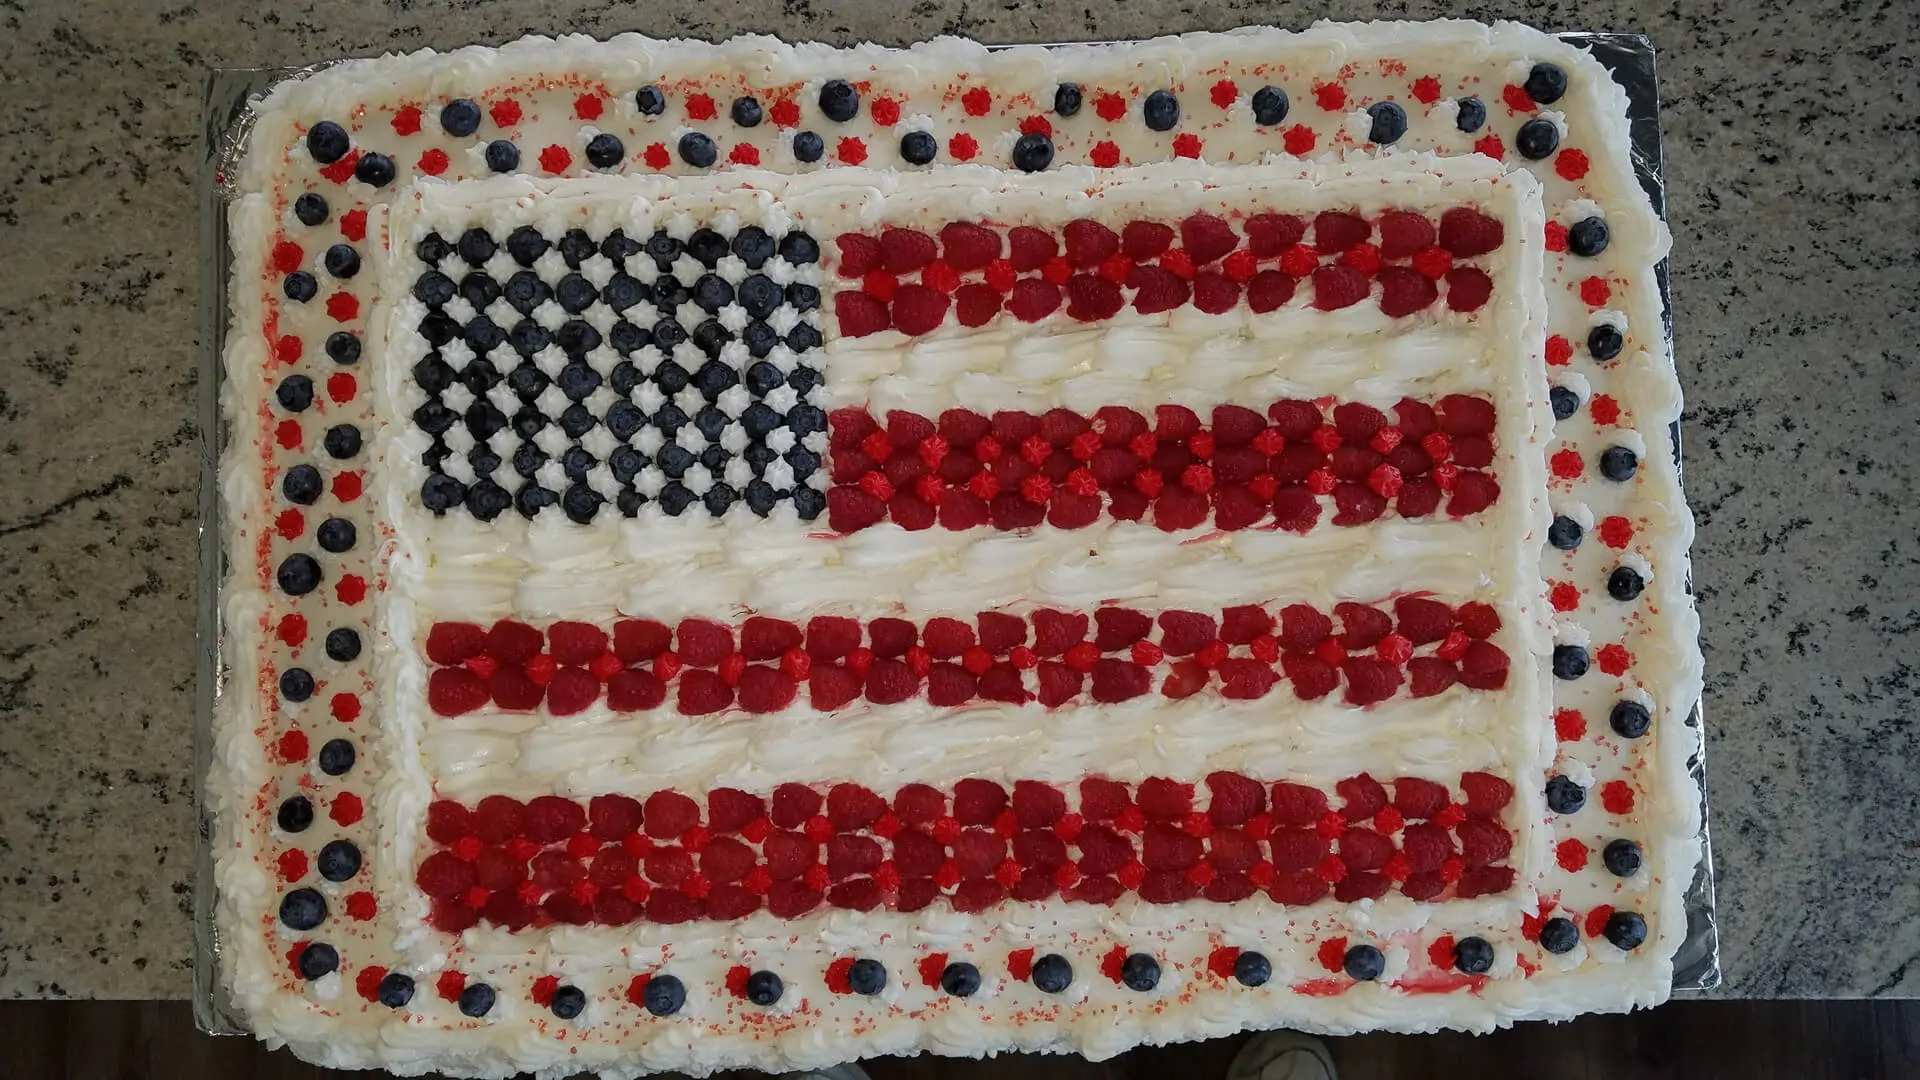 A cake with red, white and blue frosting in the shape of an american flag.